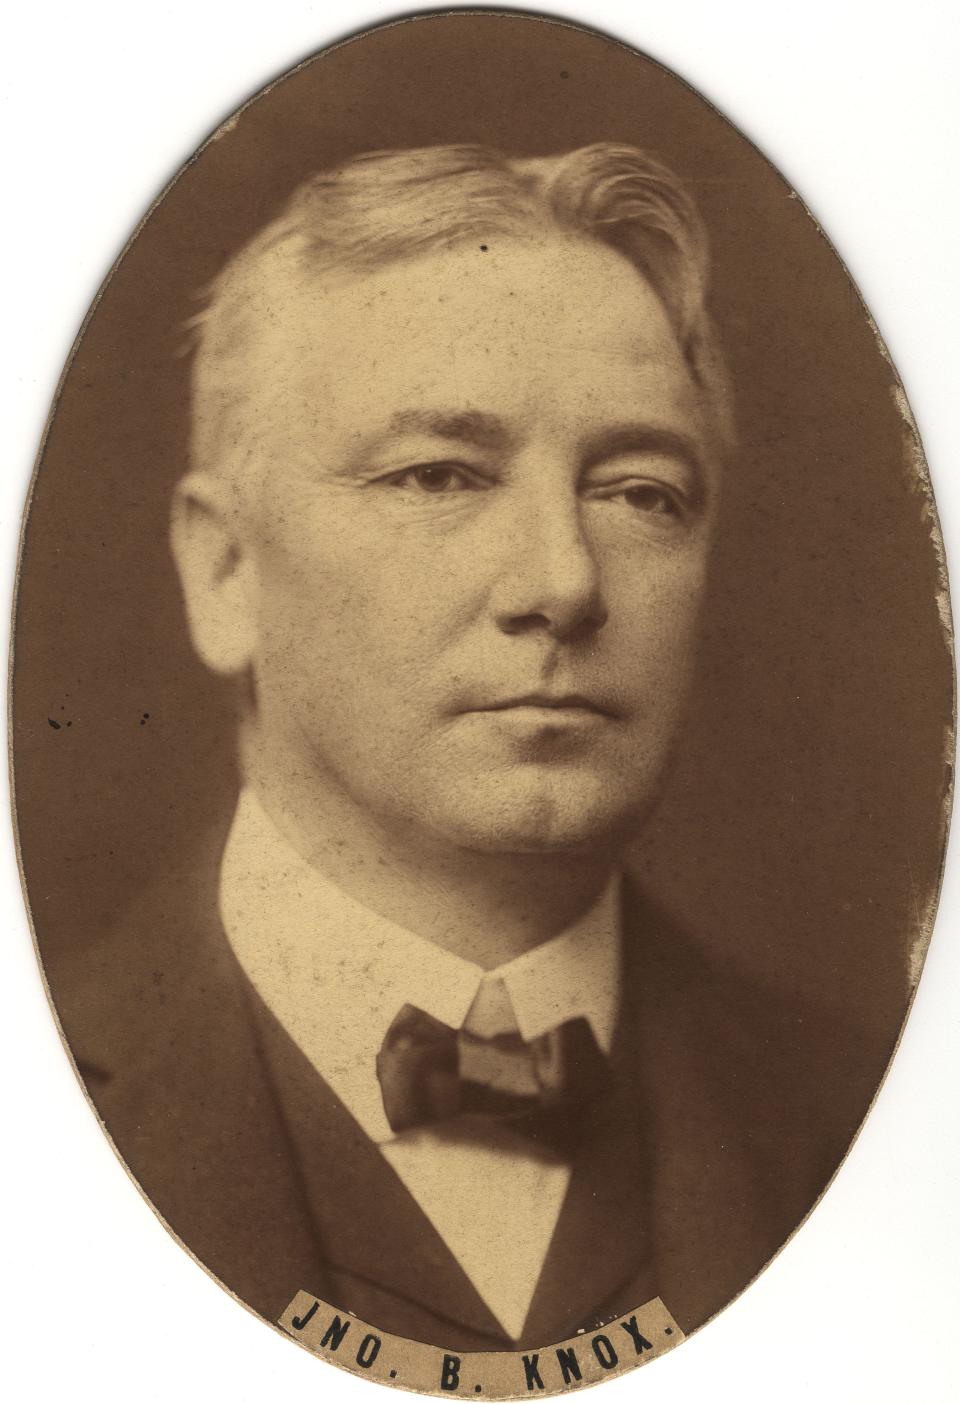 John Knox, an attorney from Anniston, served as president of the 1901 Alabama constitutional convention. "And what is it that we want to do?" Knox said in a speech shortly after the convention elected him to the position. "Why, it is, within the limits imposed by the Federal Constitution, to establish white supremacy in this state."